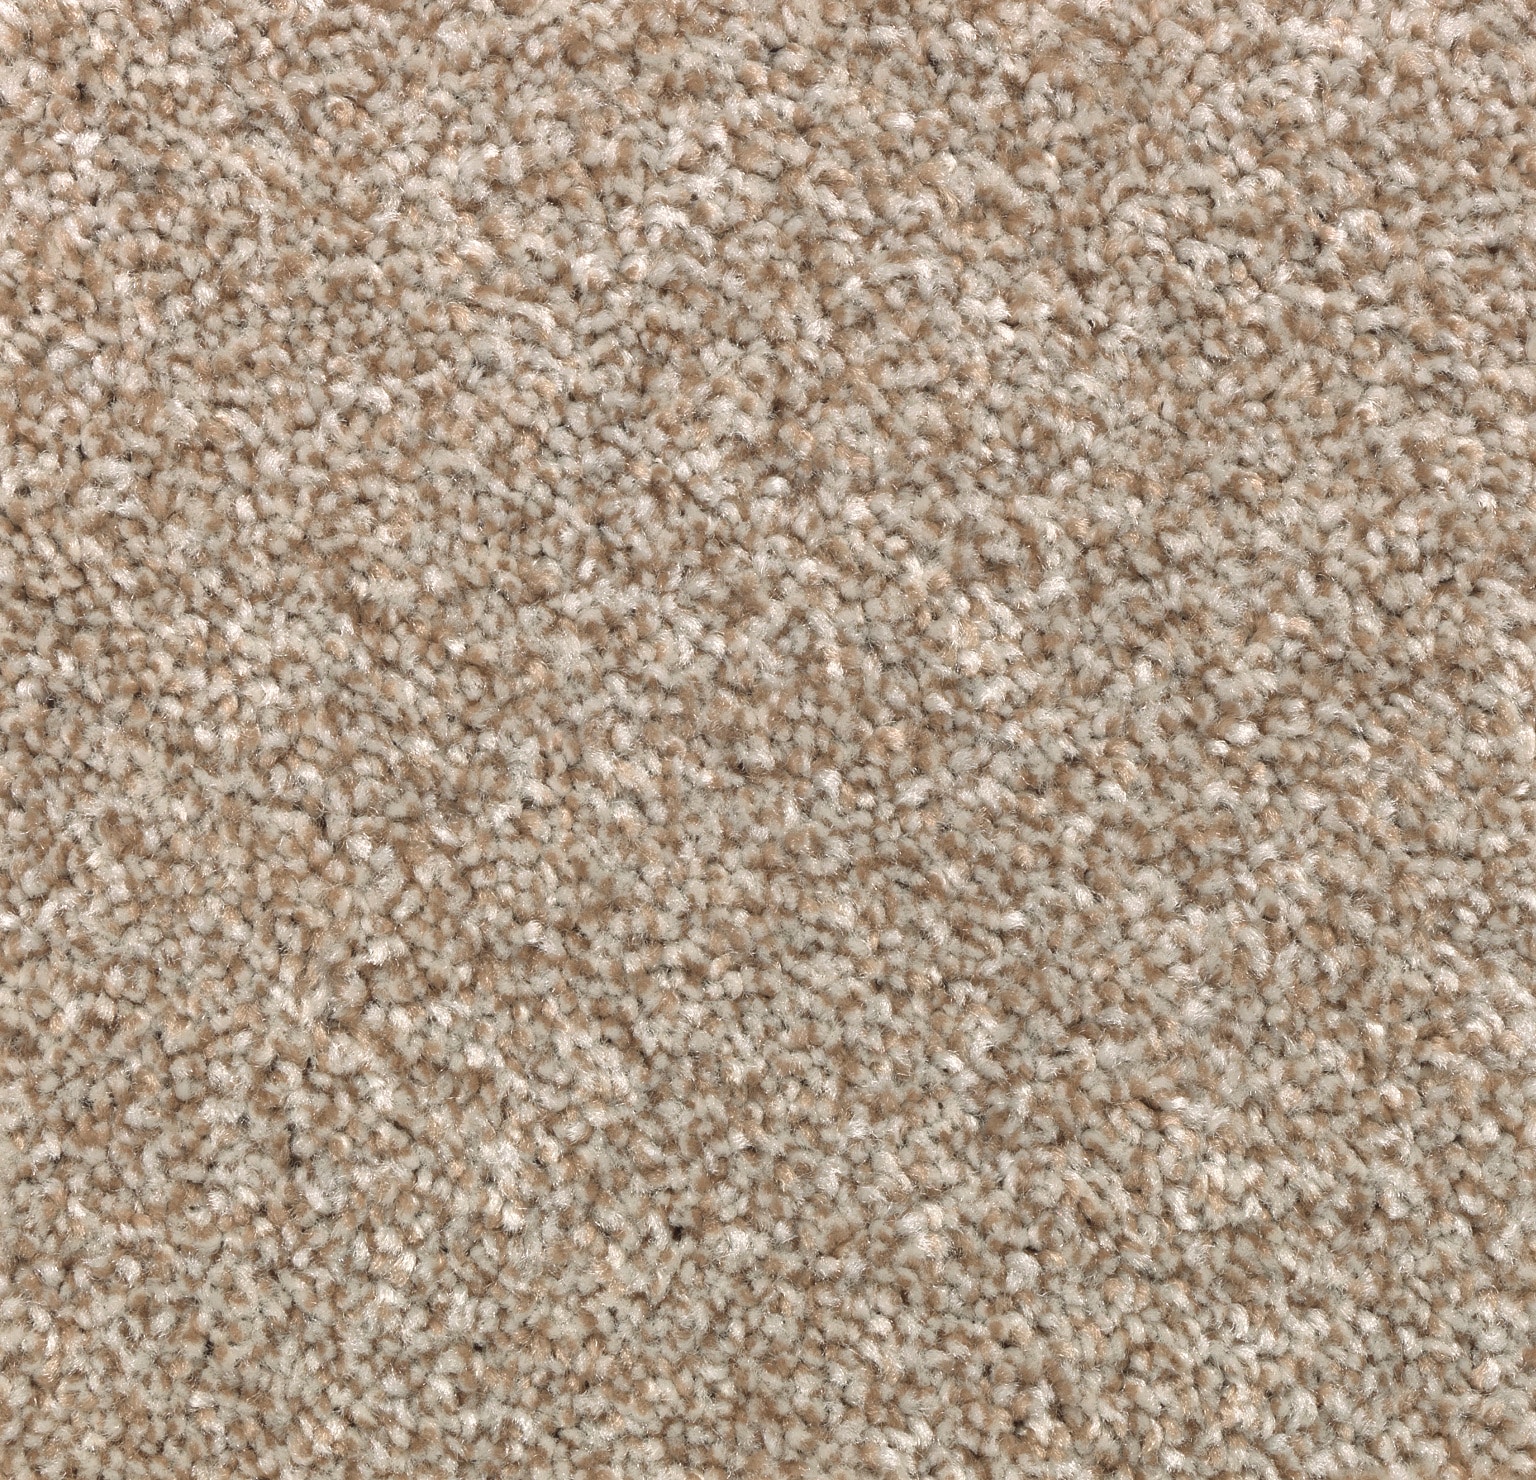 Samples in Step Textured the Durable Carpet at Beige Carpet STAINMASTER (Sample) department Carrington II